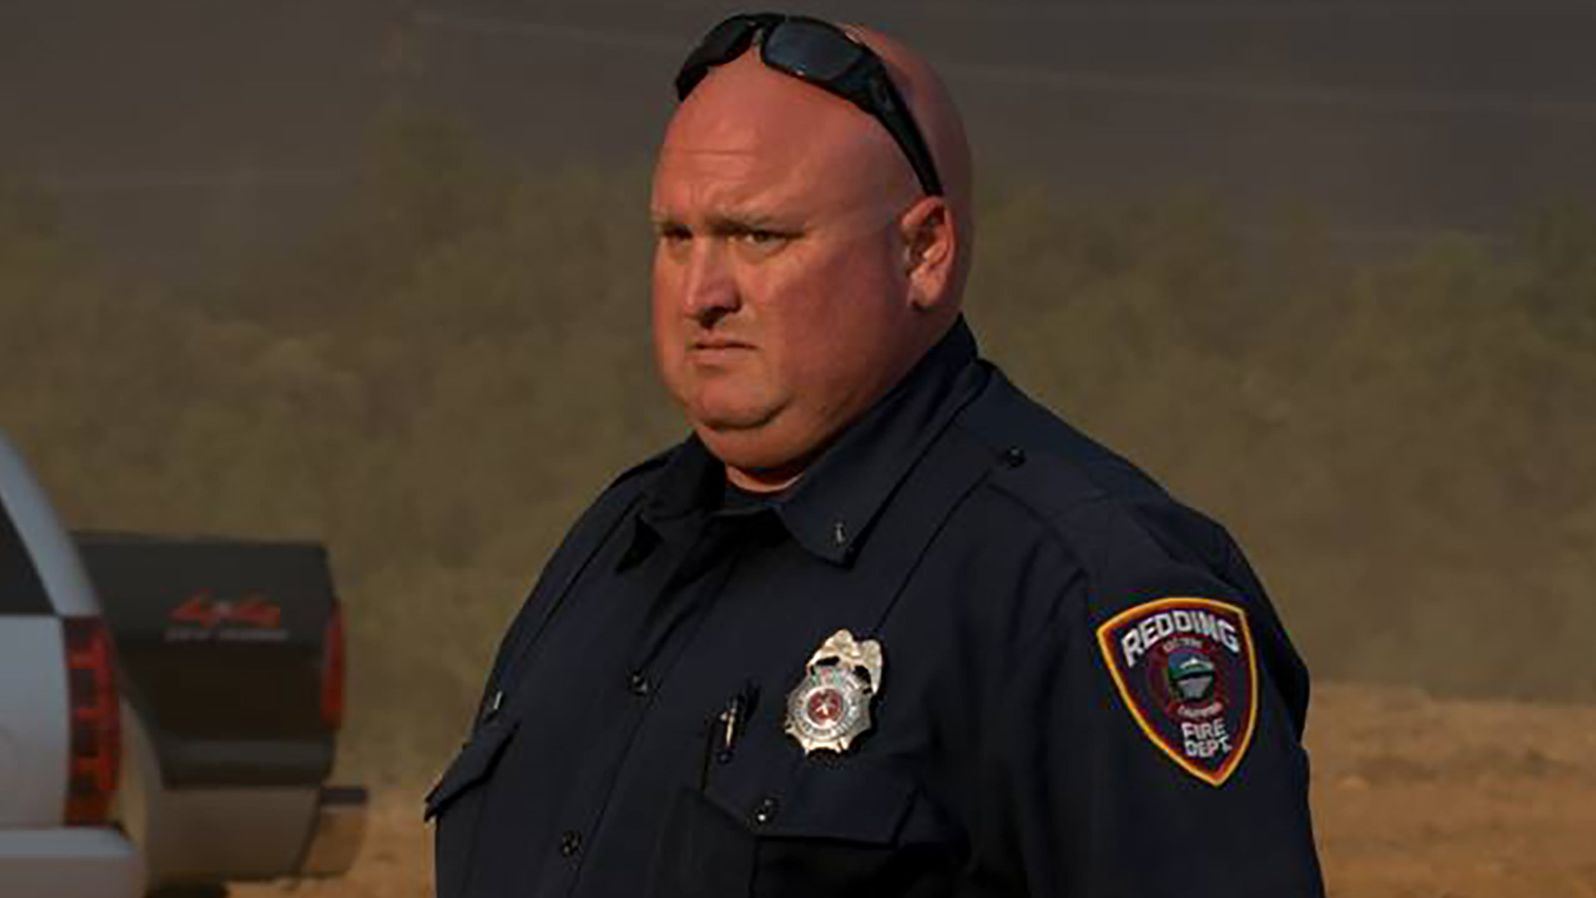 Fire inspector Jeremy Stoke died while helping with evacuations Thursday, Redding firefighters union said.